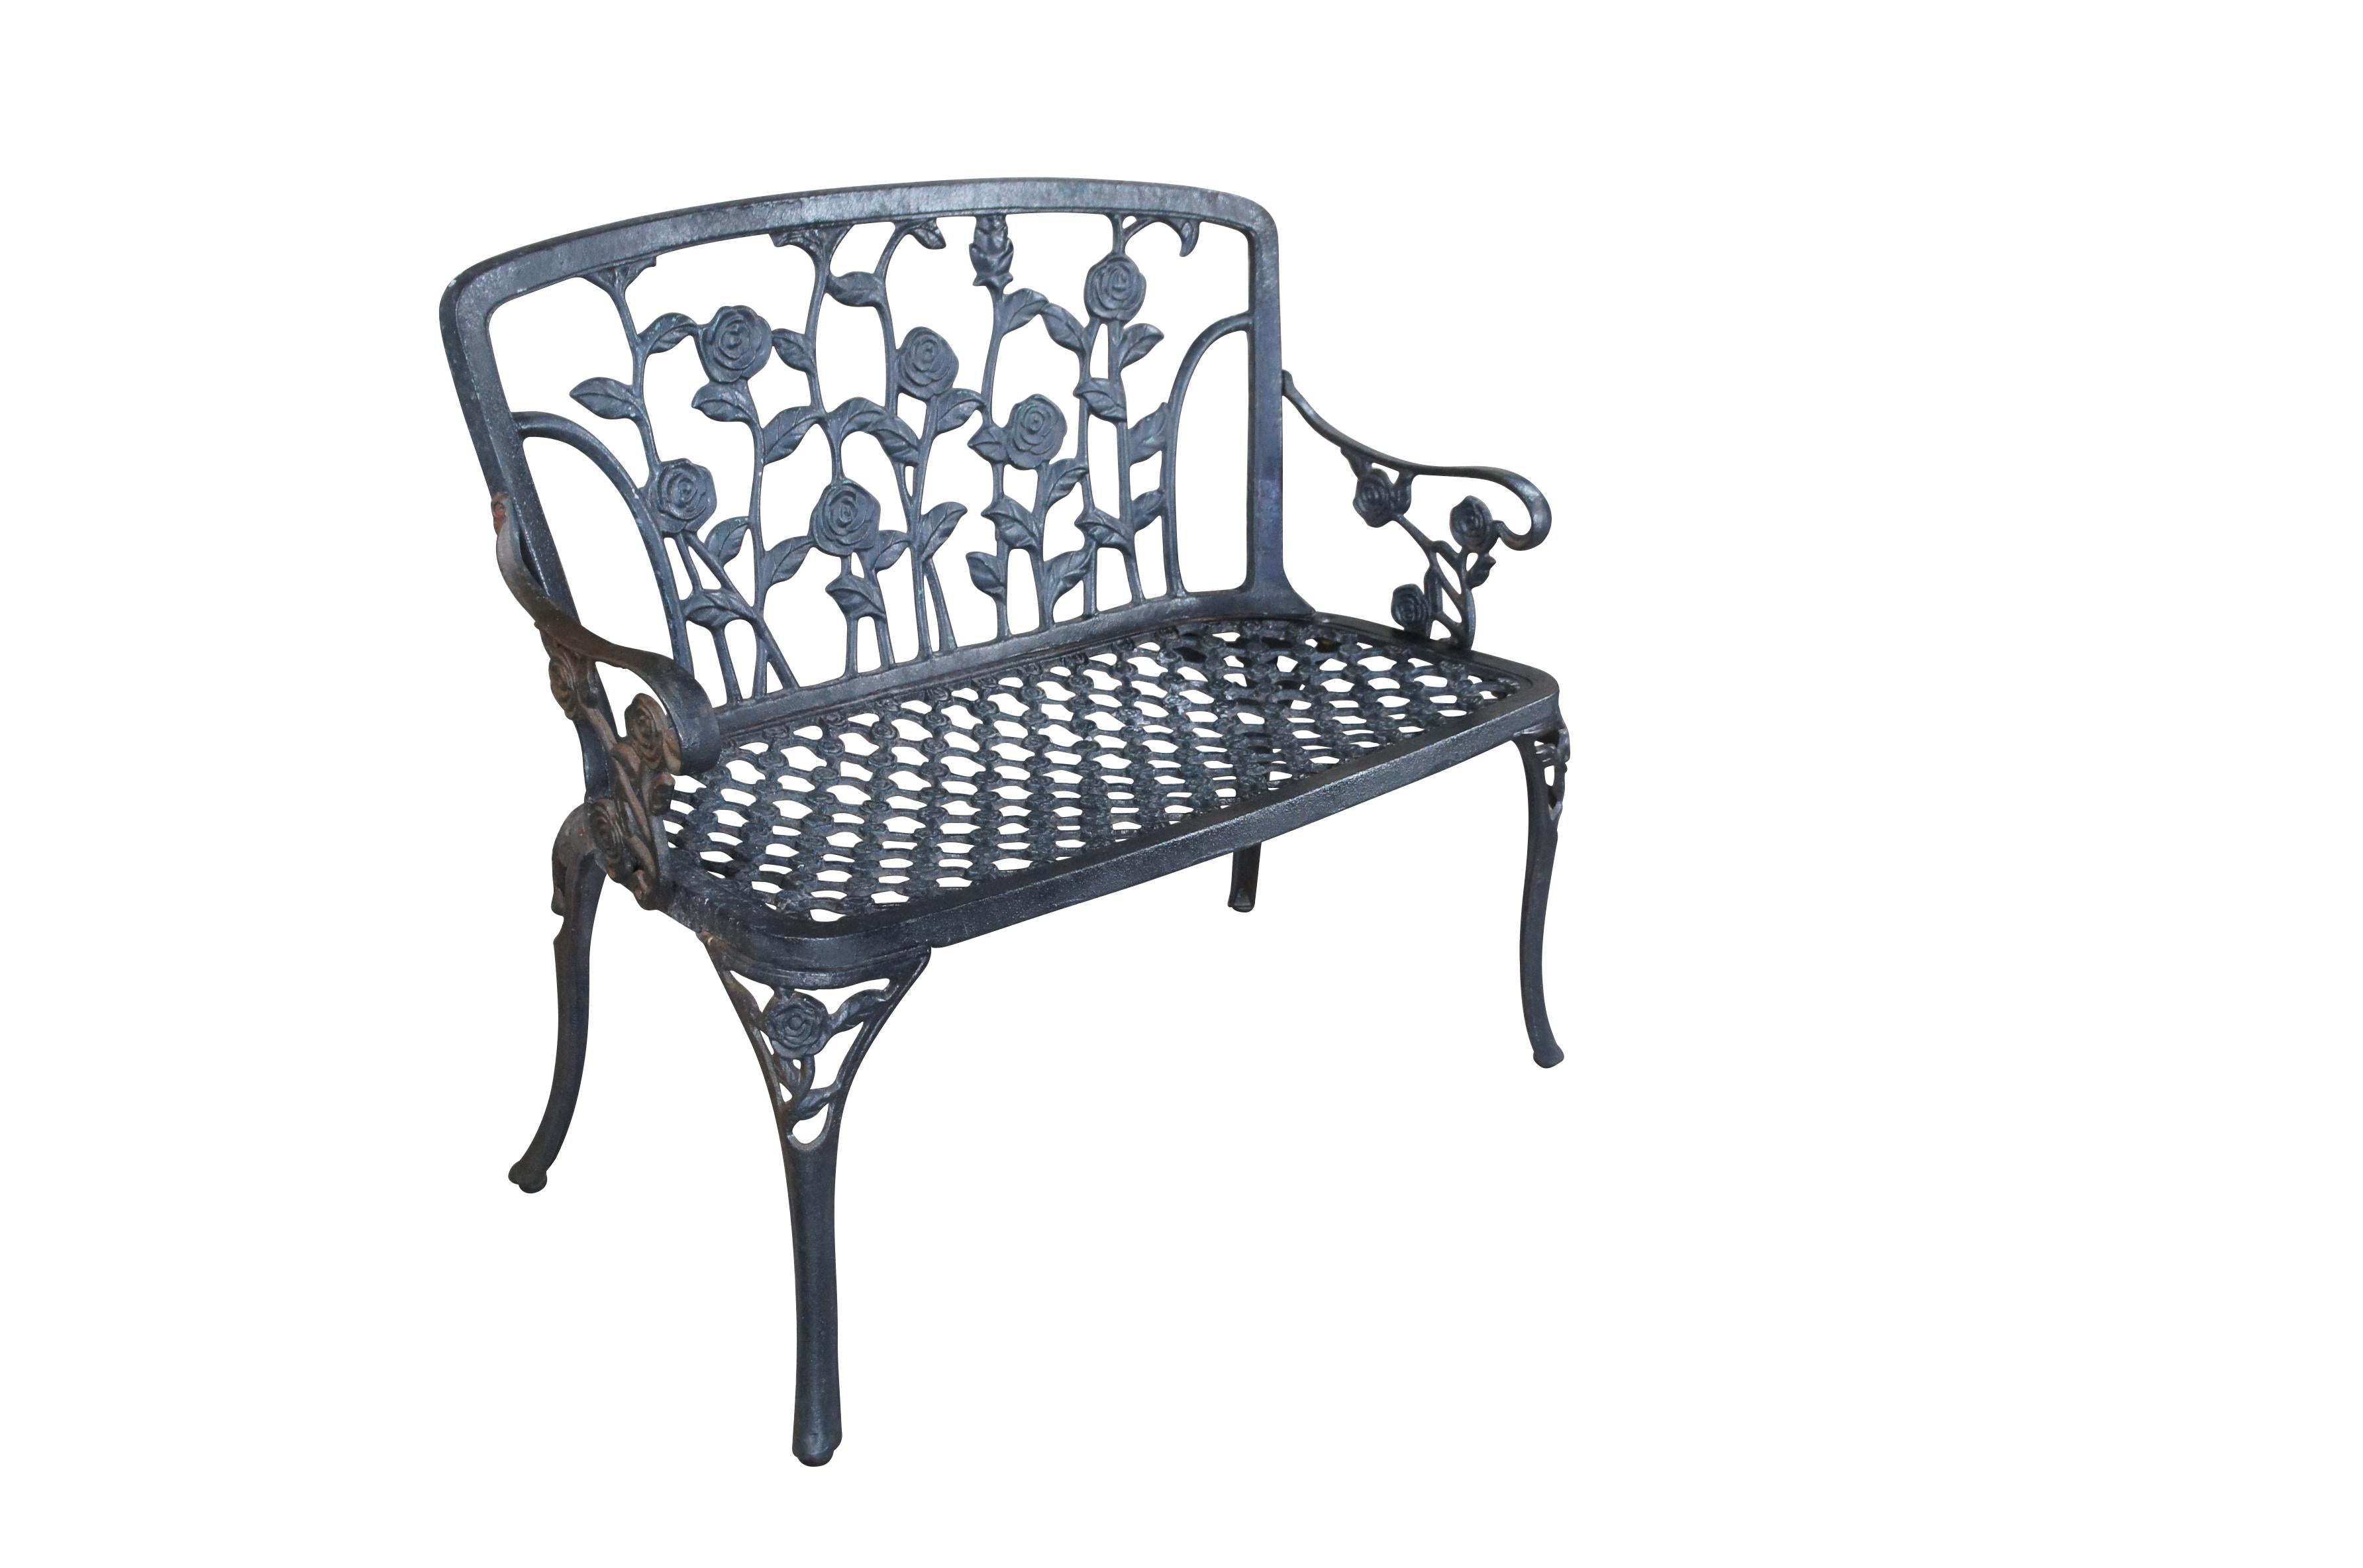 French Provincial Vintage Metal Climbing Rose Outdoor Garden Bench Settee Loveseat 42